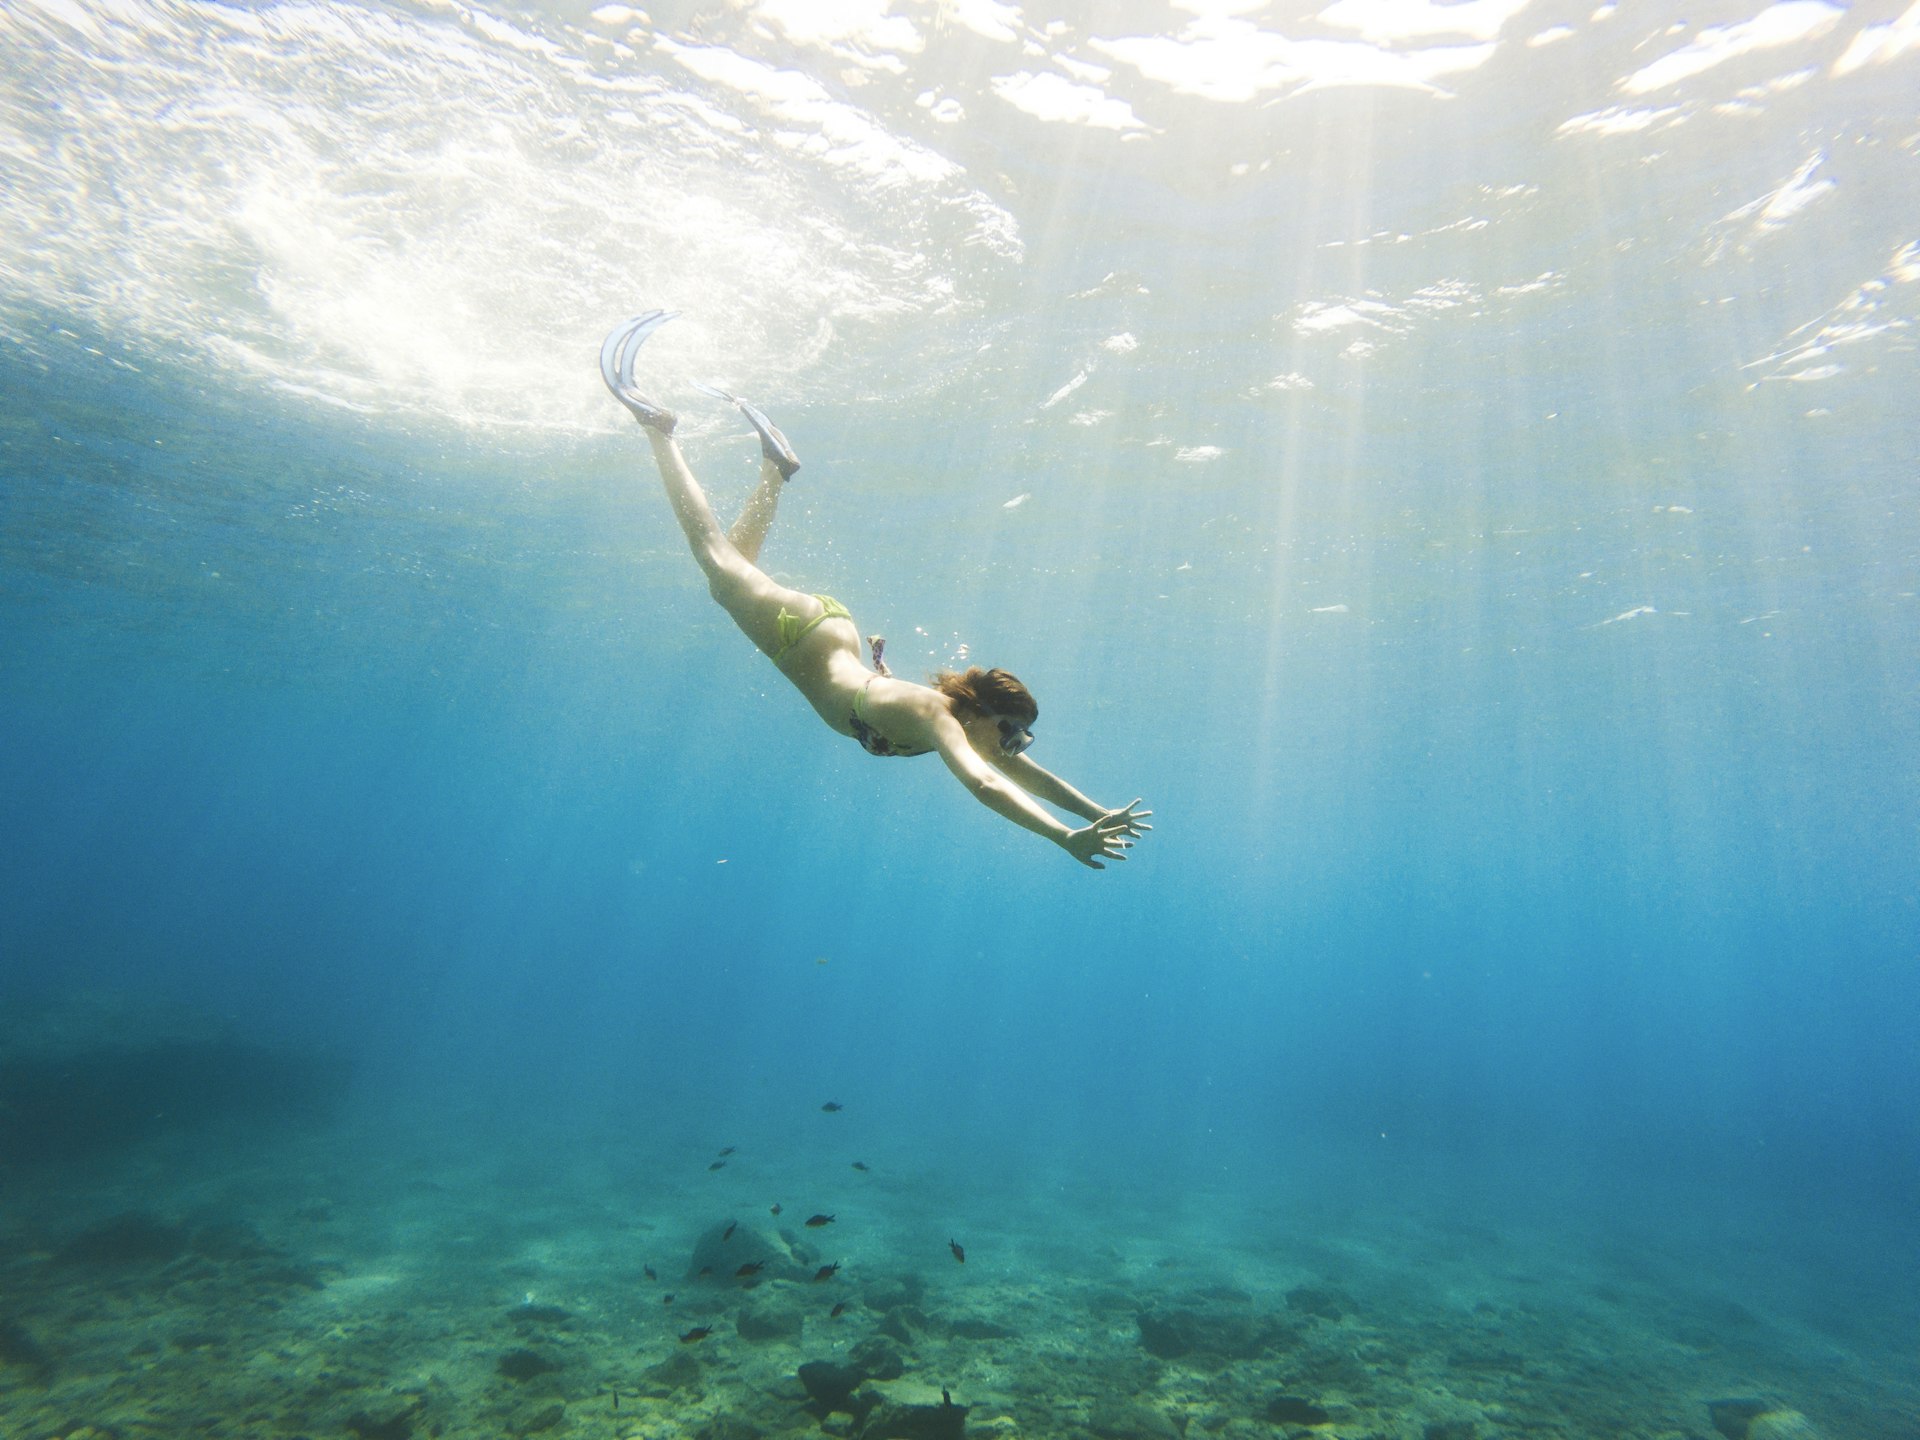 A woman dives into the clear blue sea in the Cyclades islands